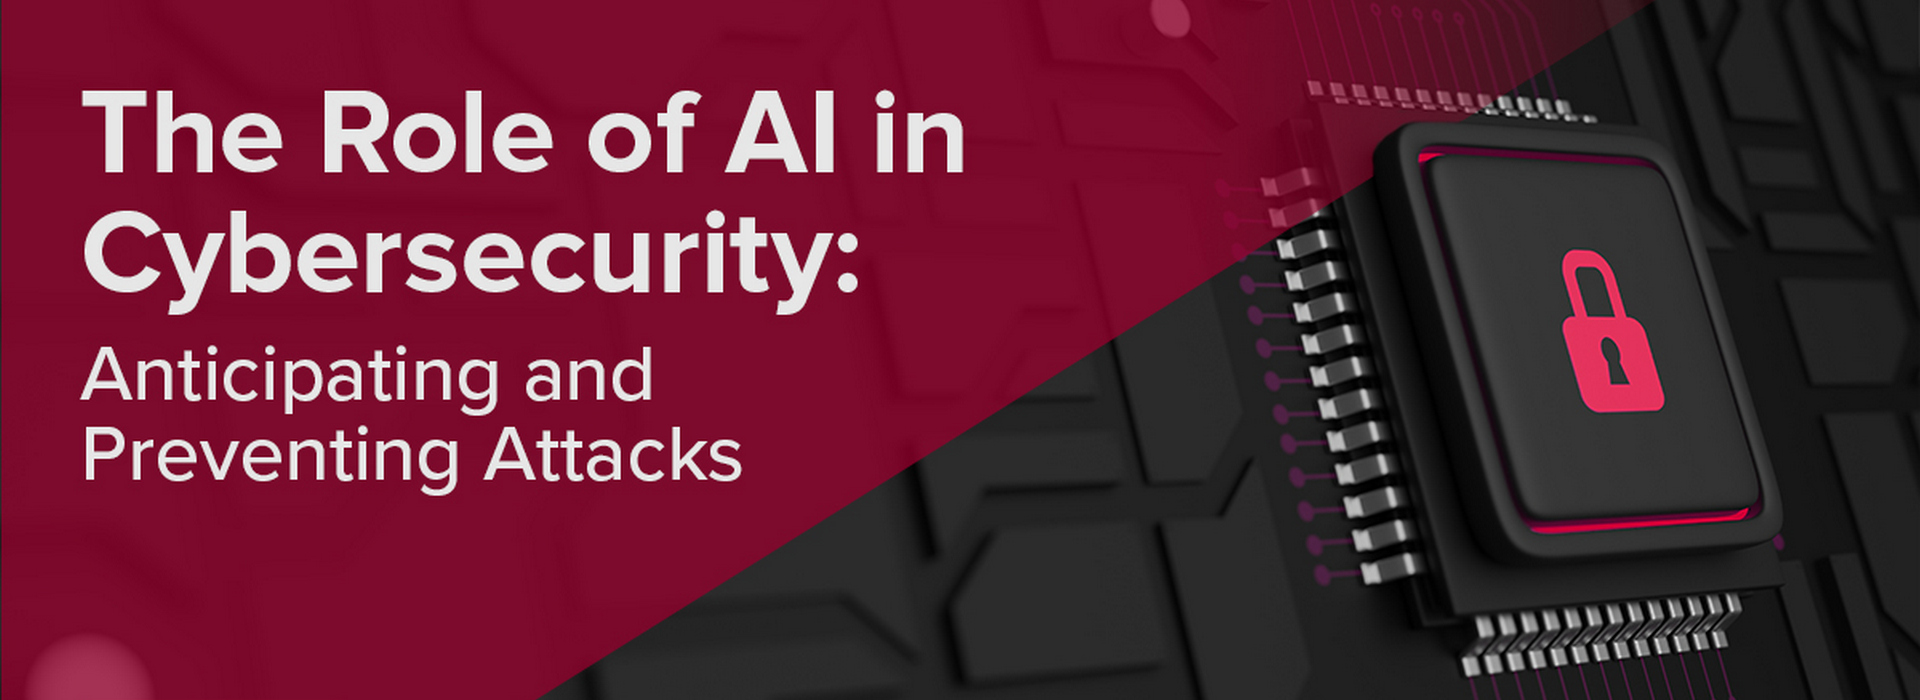 The Role of AI in Cybersecurity: Anticipating and Preventing Attacks